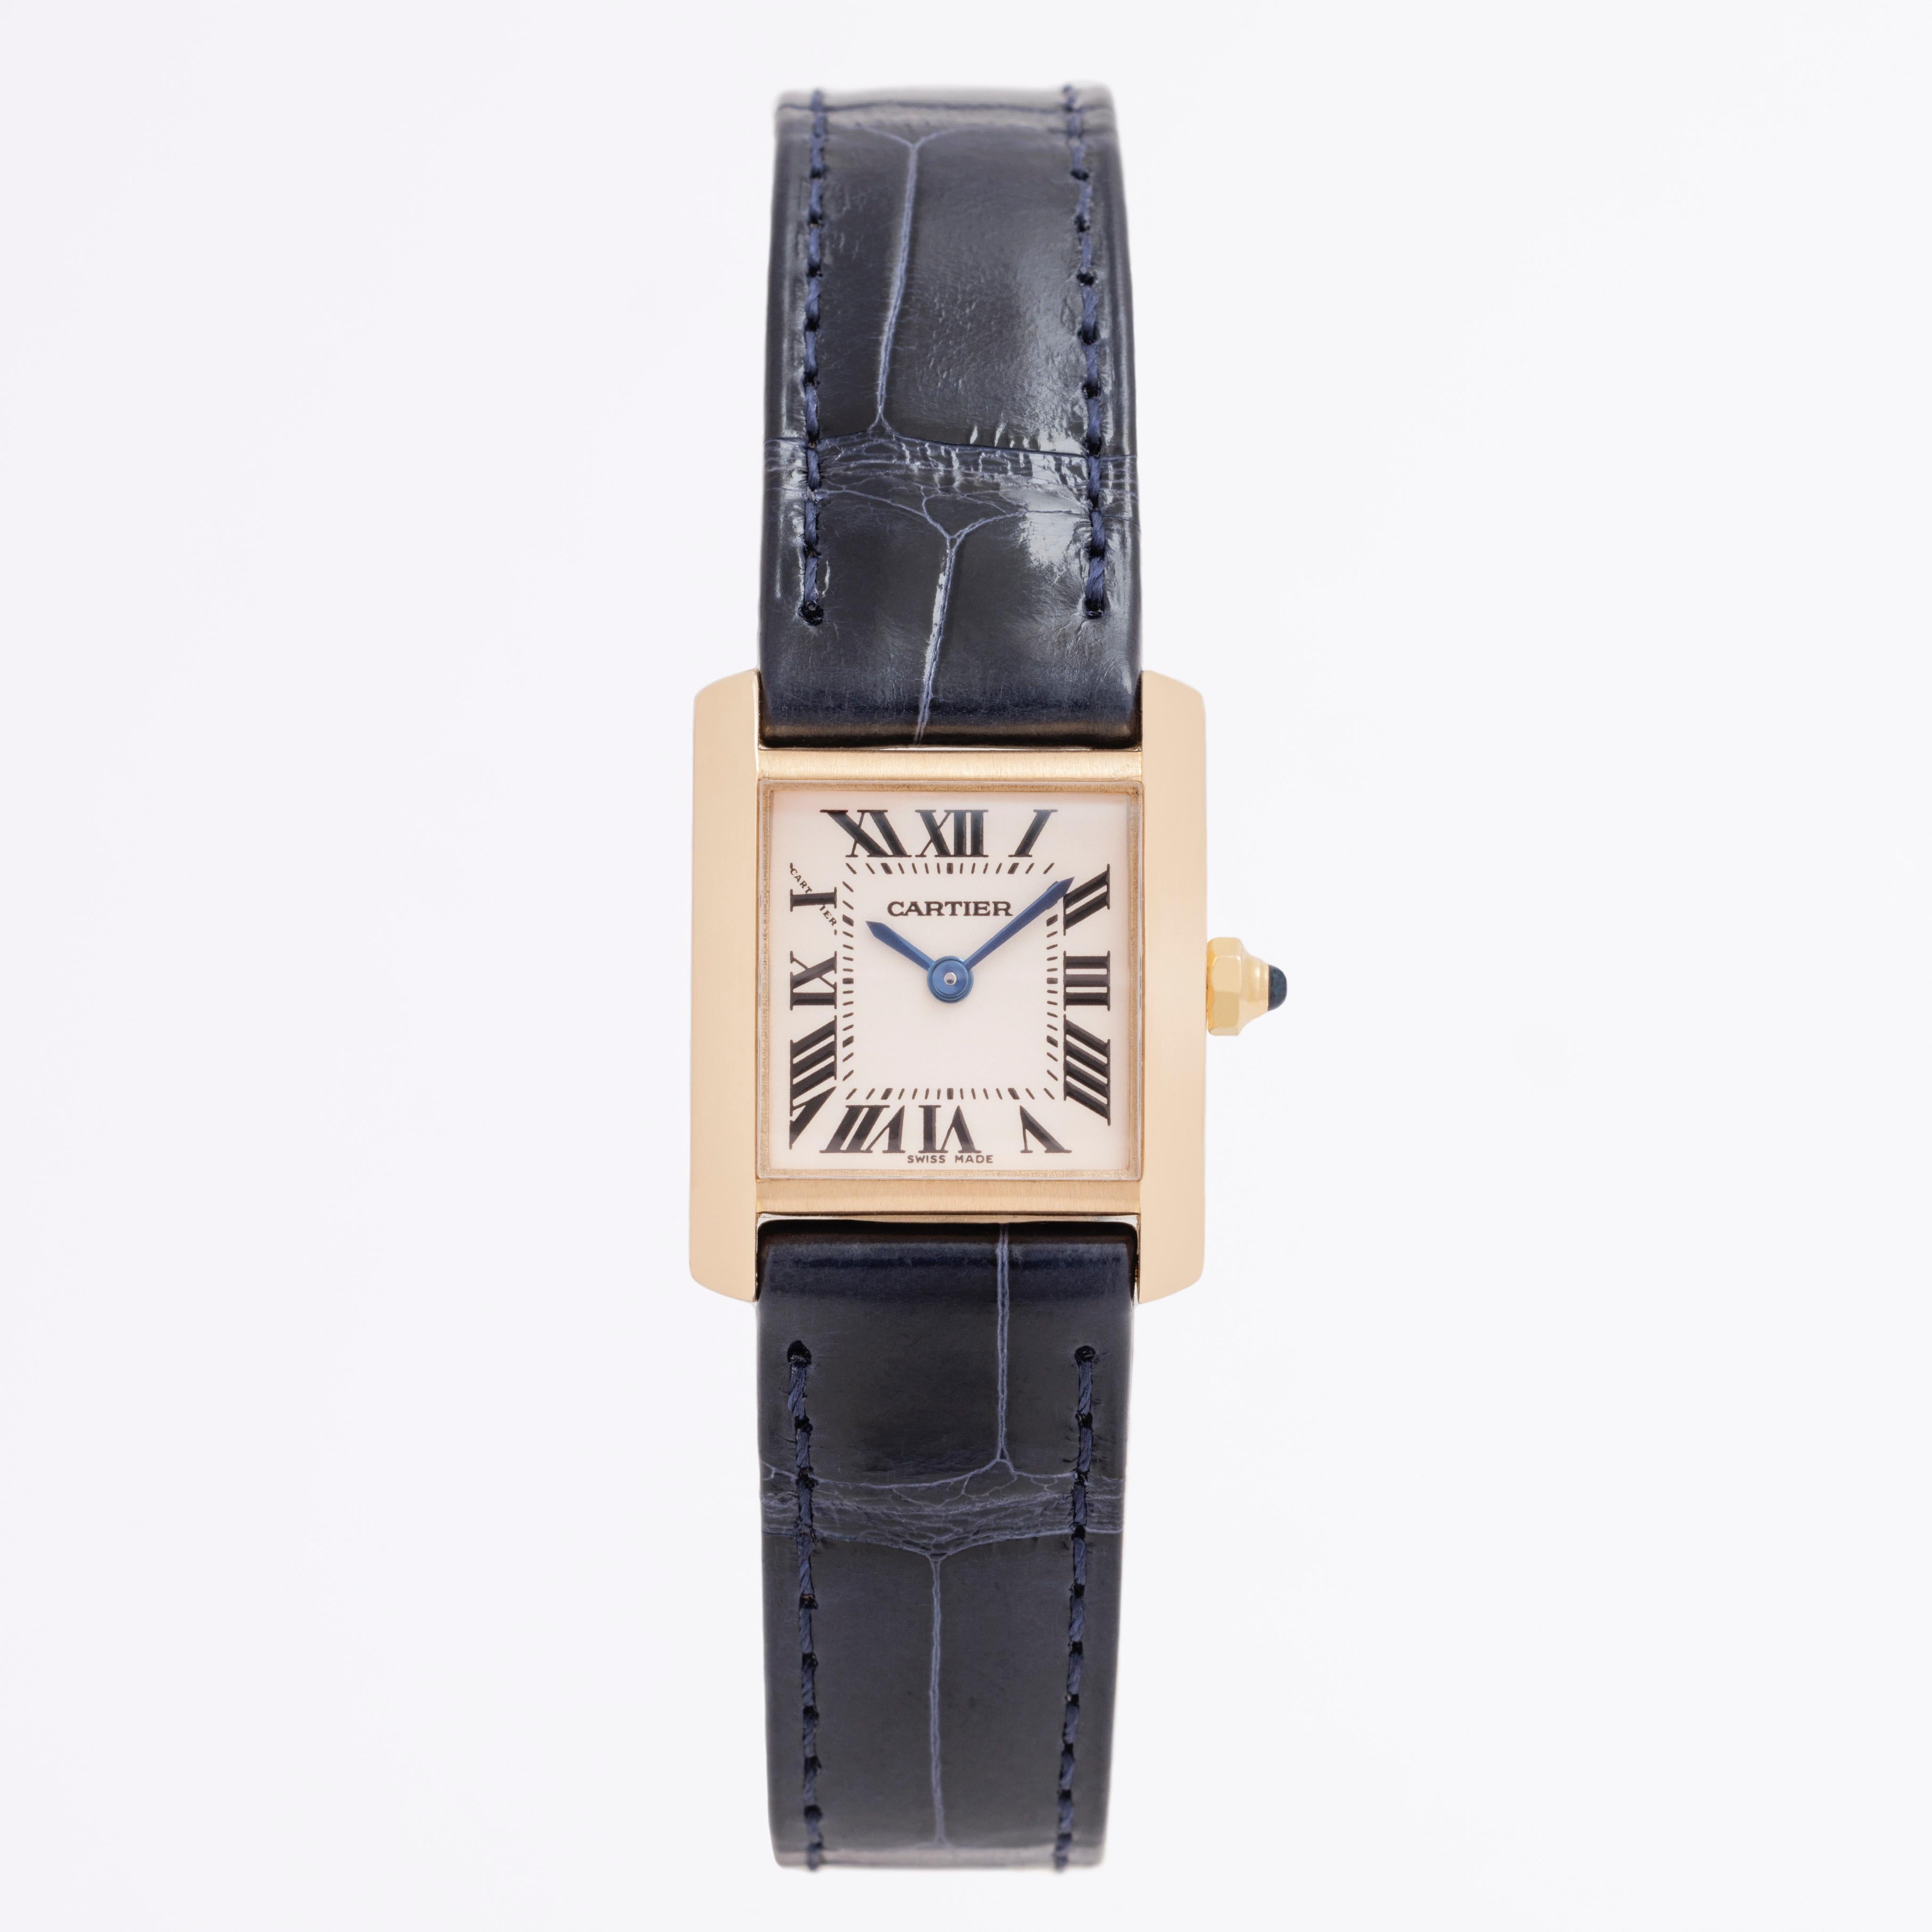 Cartier 18k Yellow Gold Tank Française Model W5000256  c.2000 
20mm x 25mm 
Cartier Navy Alligator Strap 
Quartz Movement
Like new condition. 
Ships in Cartier red velvet travel pouch



Stephanie Windsor guarantees the proper functioning of this